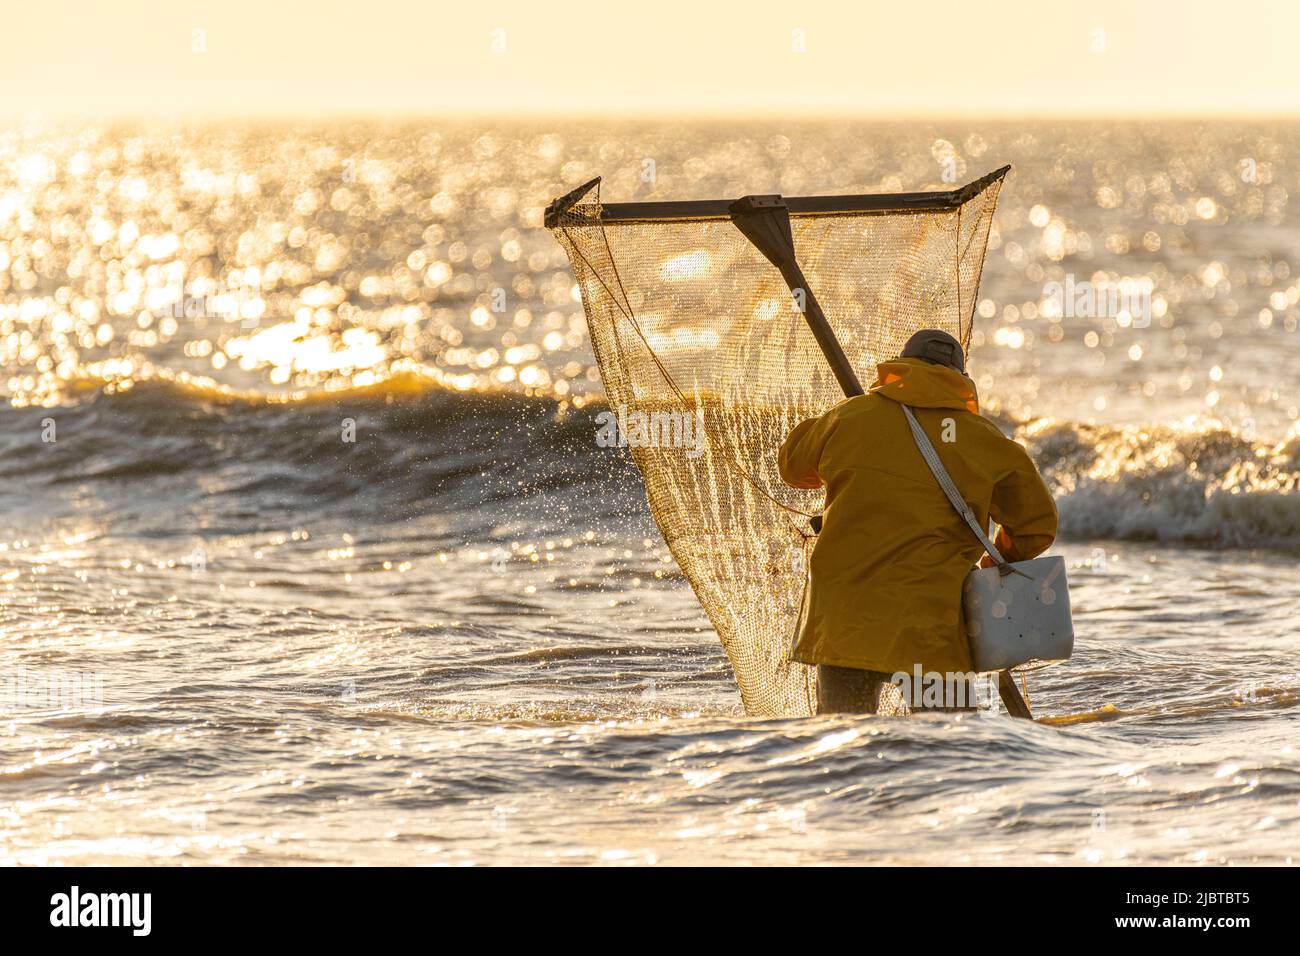 France, Somme, Ault, two hours before low tide, the fishermen come with their net to fish for shrimps (crangon crangon) by pushing this net in front of them and walking along the sea front Stock Photo